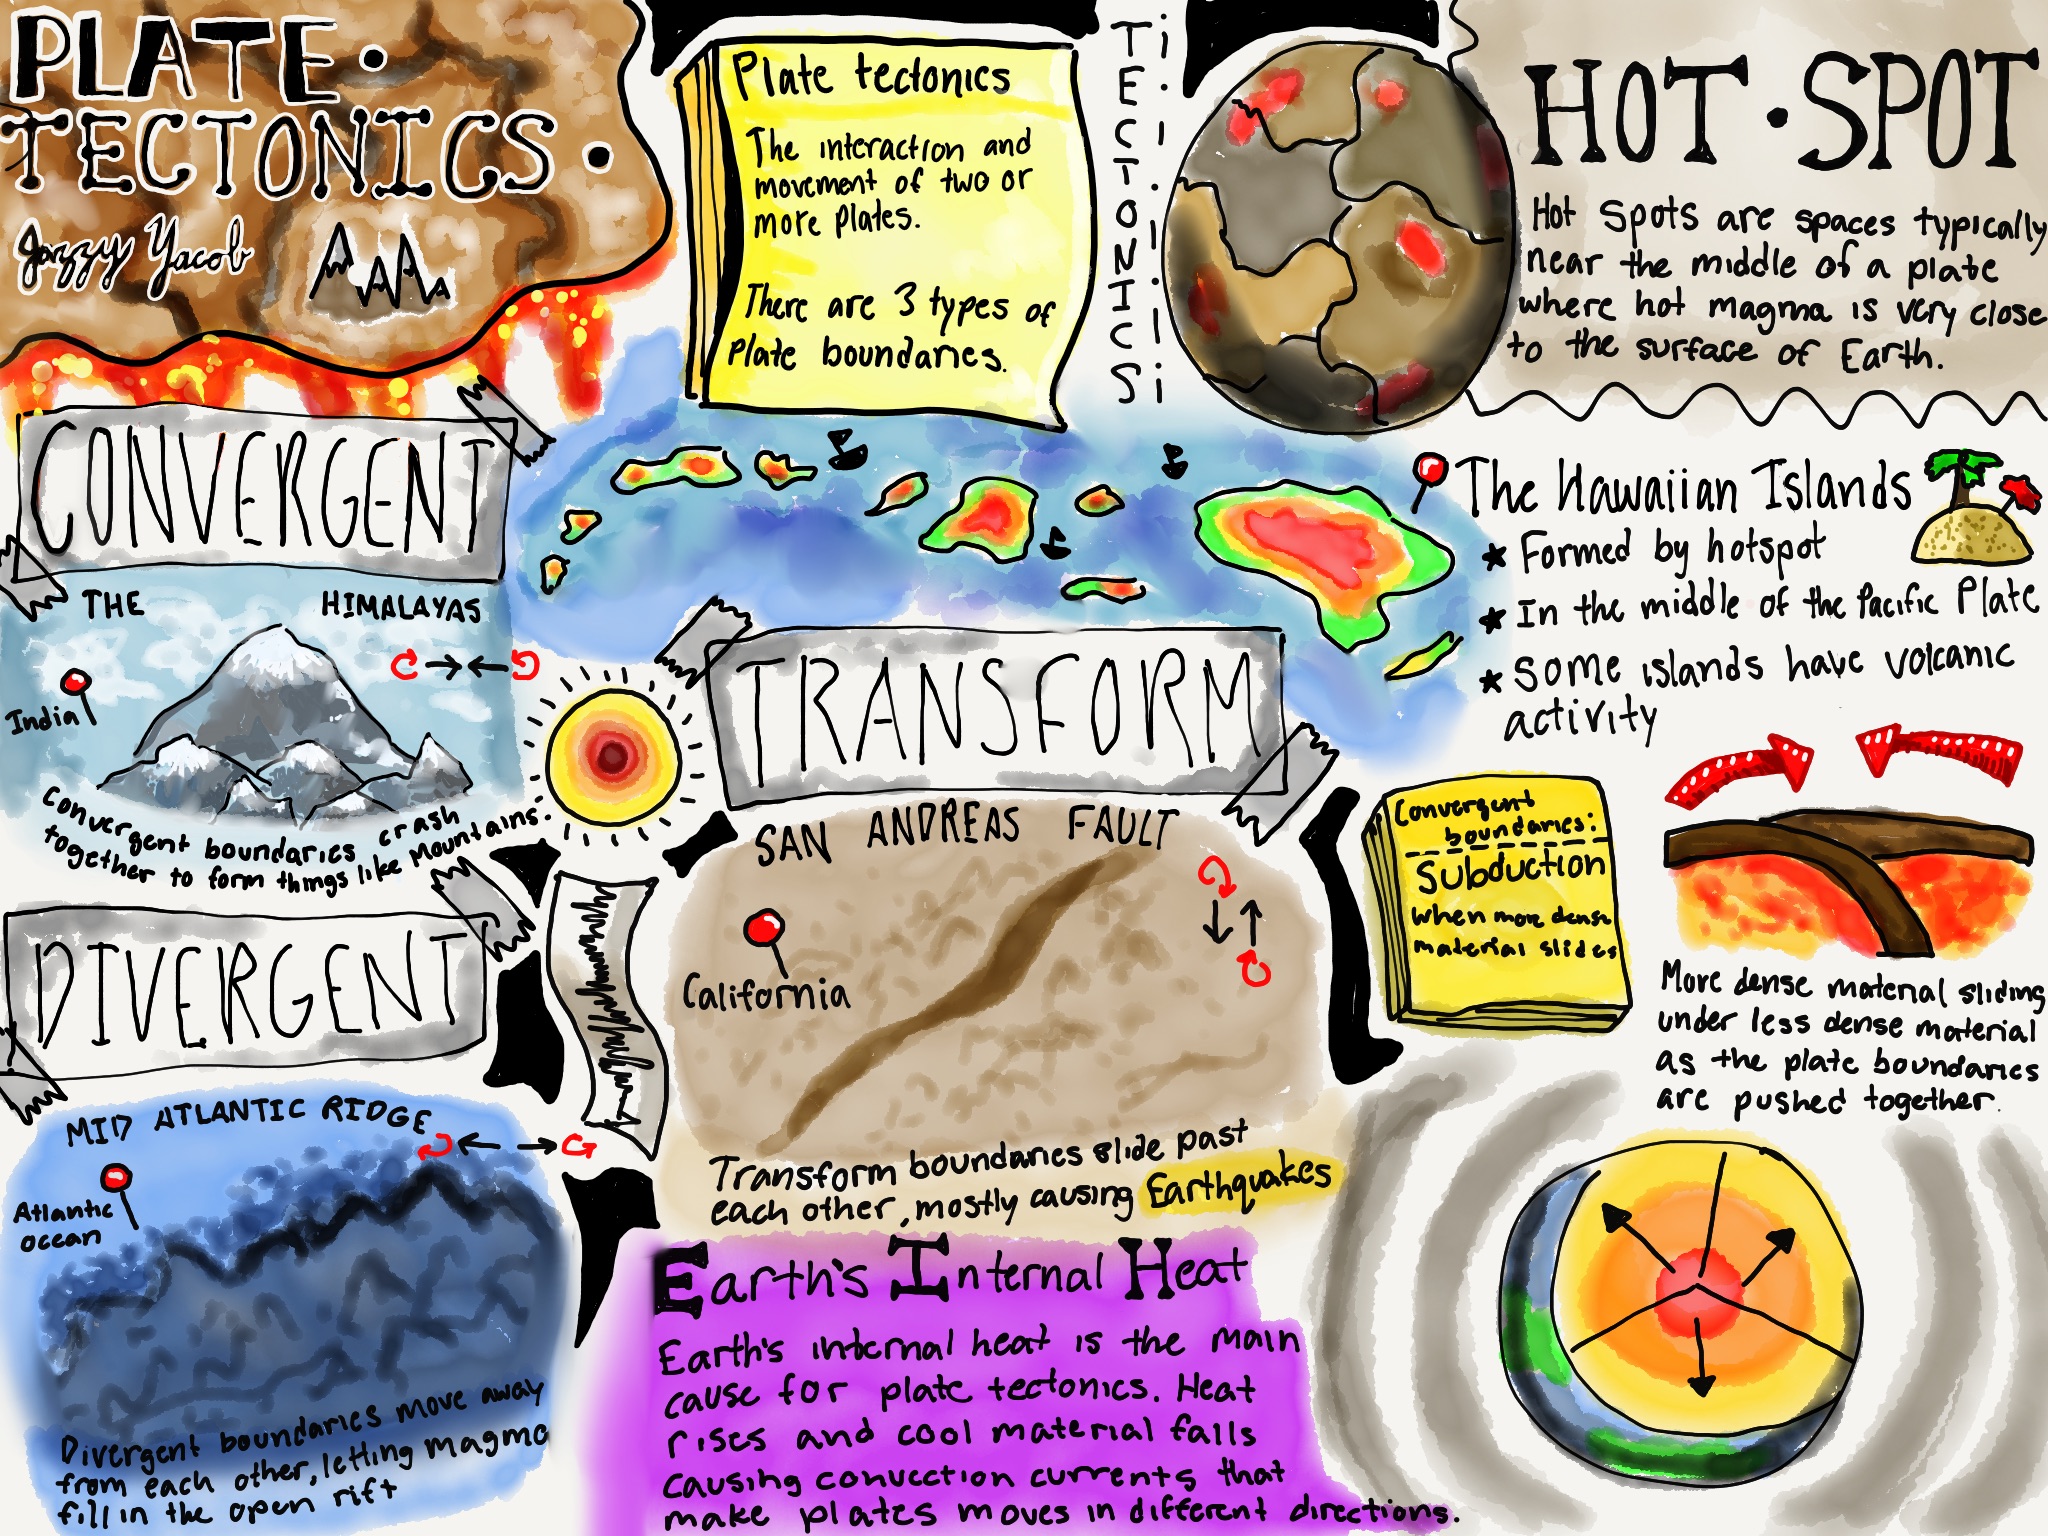 Sketchnote for plate tectonics 